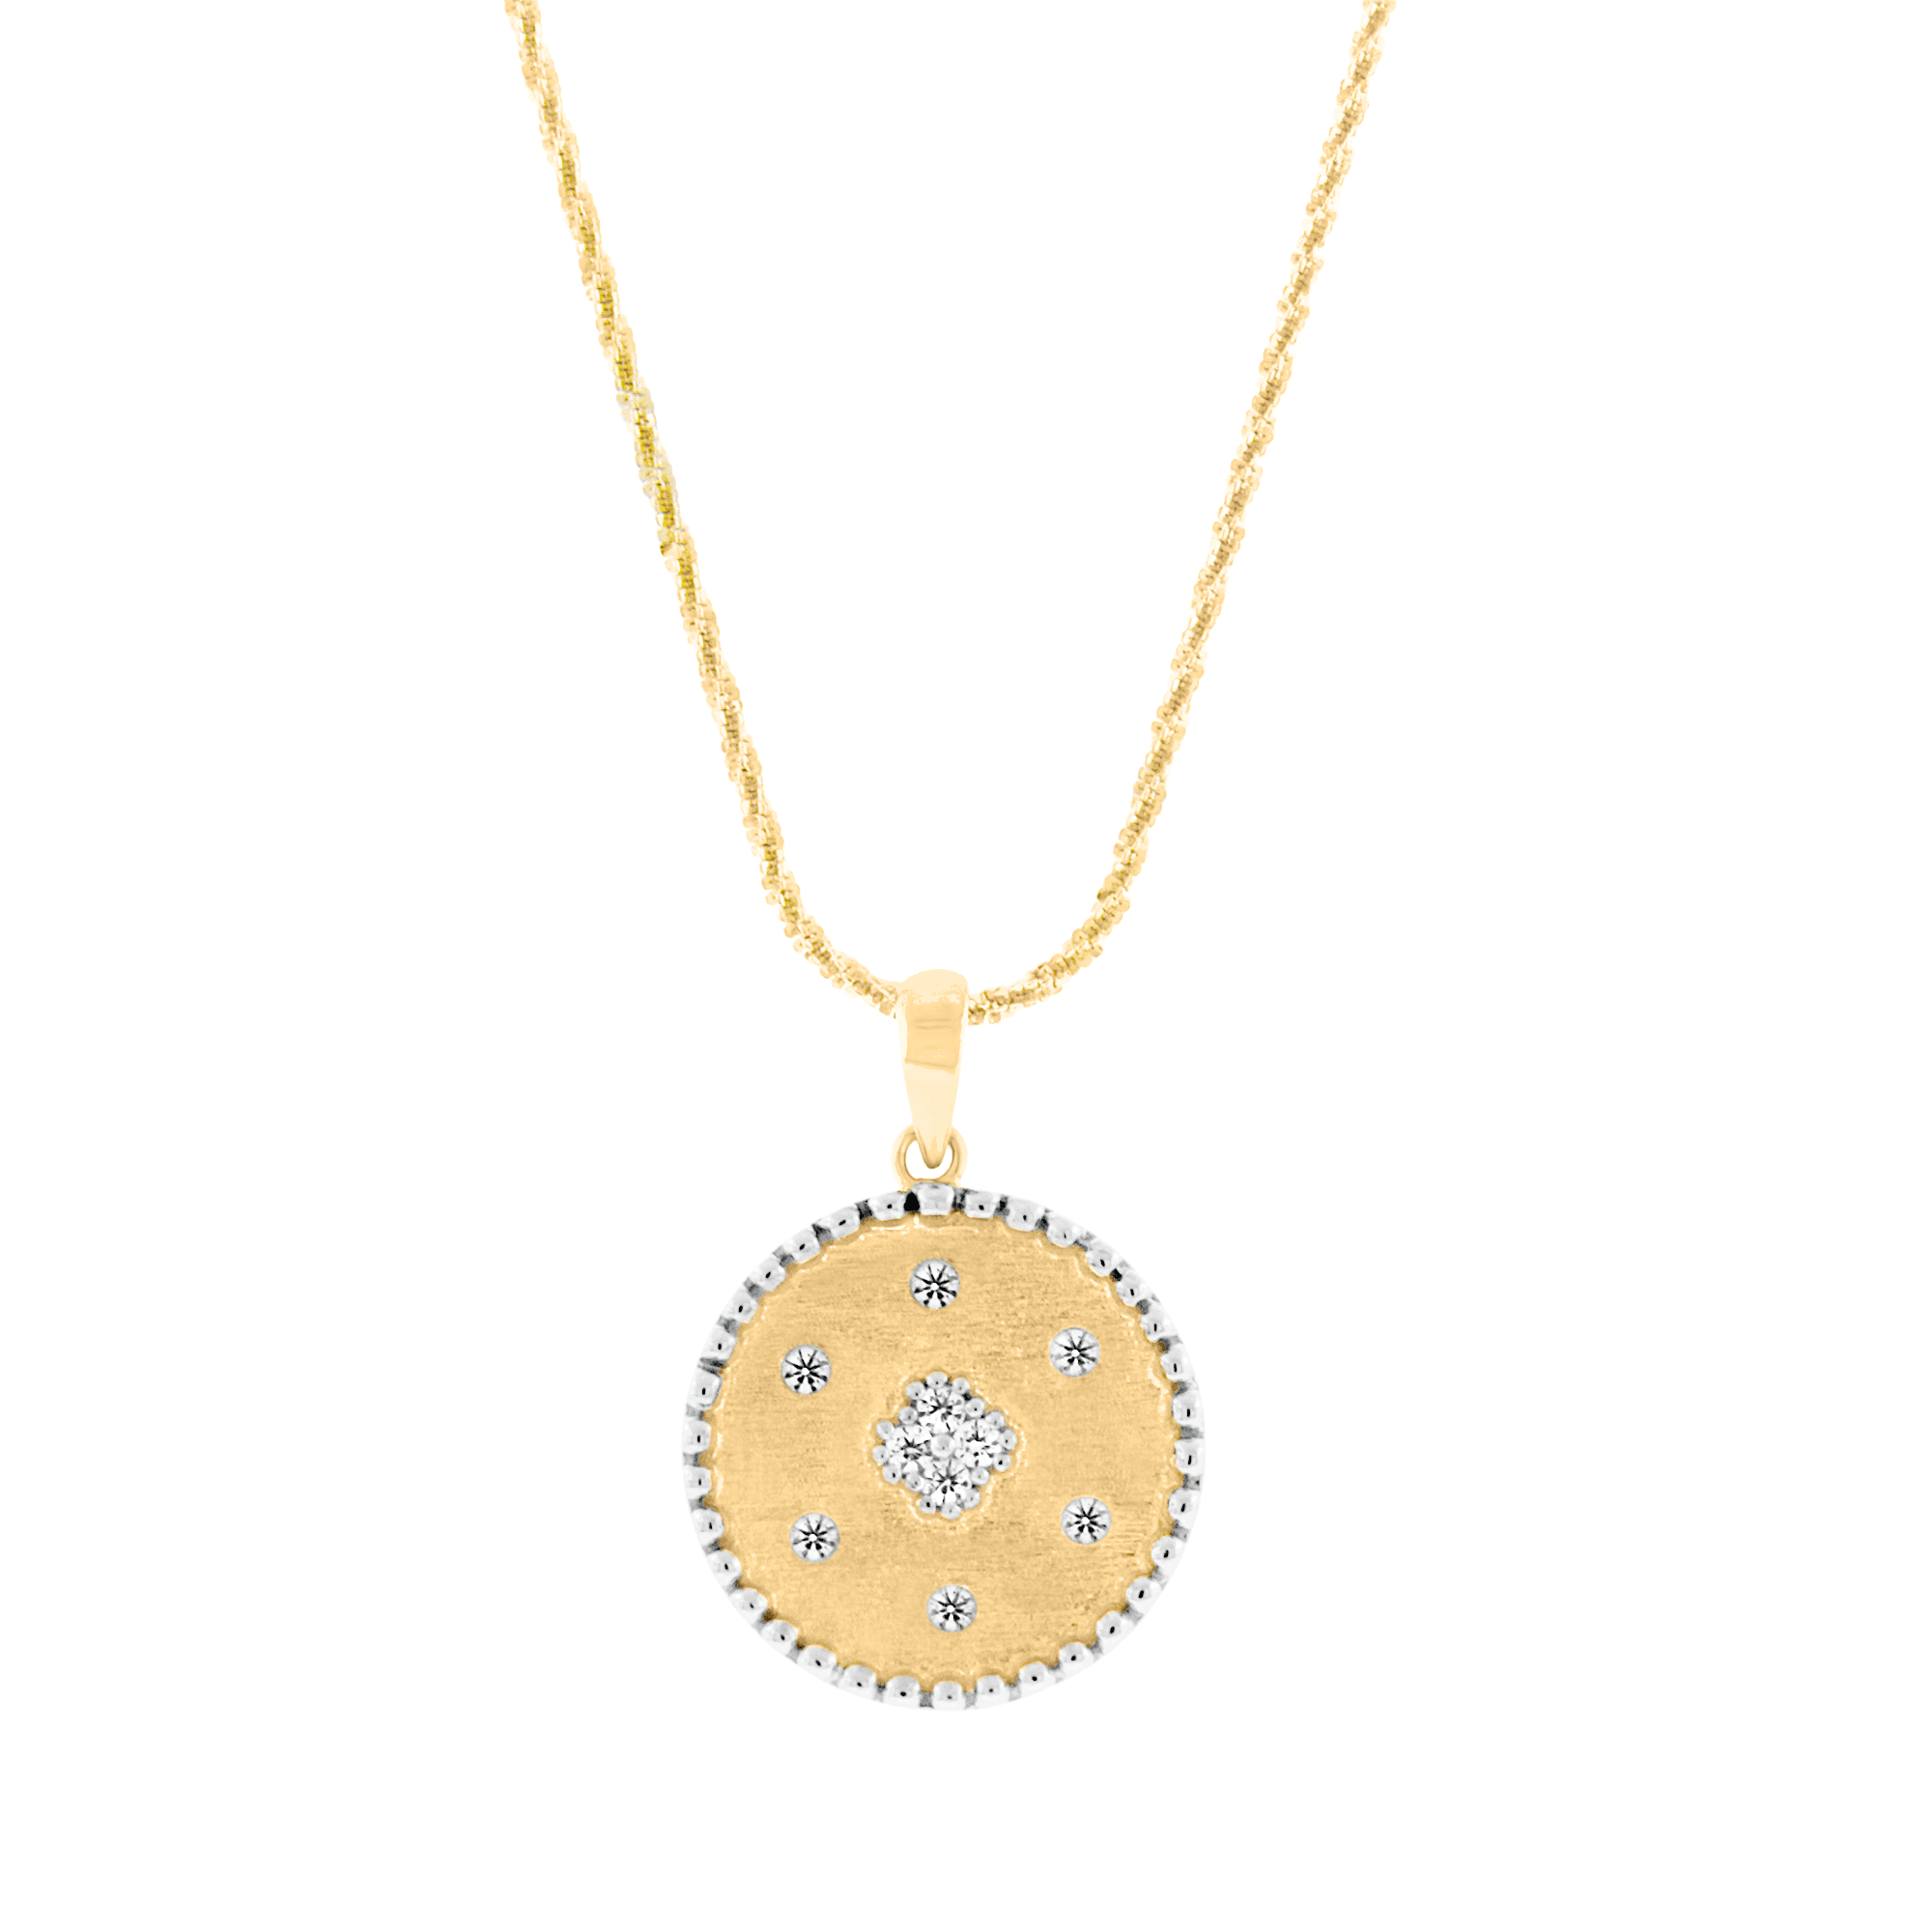 Gold 2-Tone Frosted Rounded Pendant Necklace